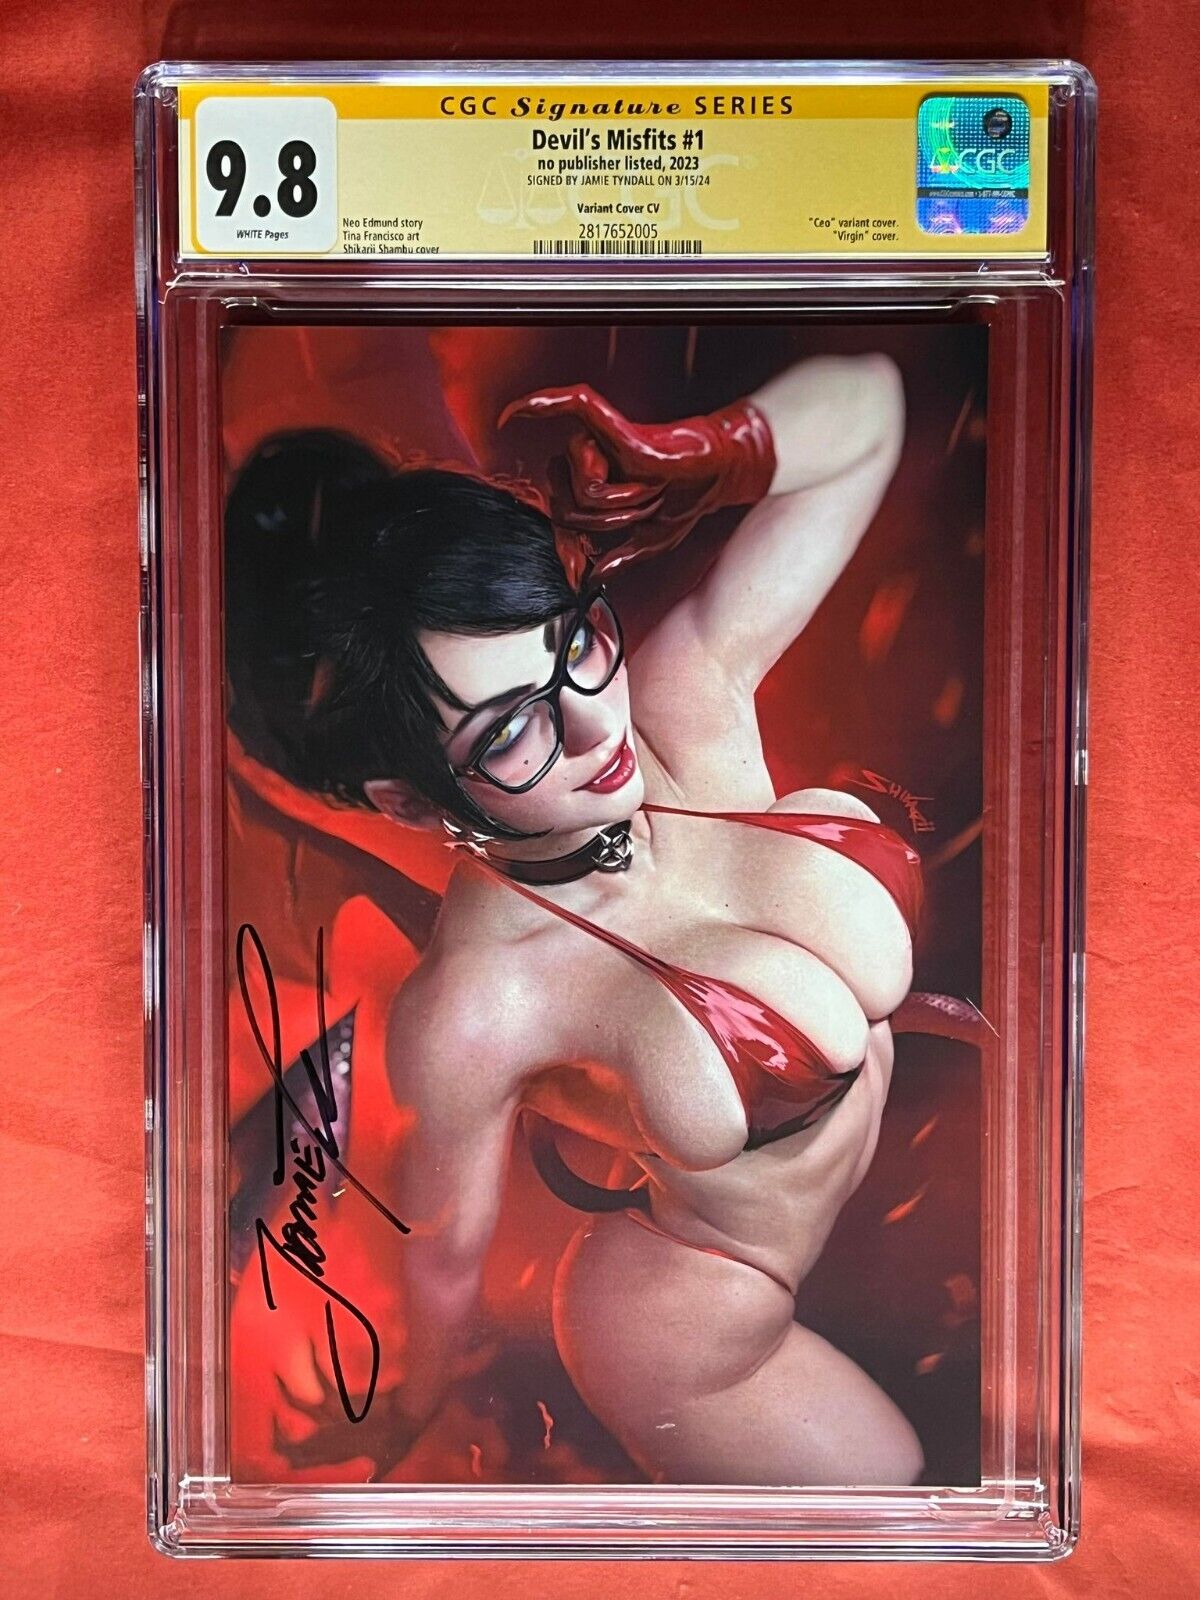 The Devil’s Misfits 1 Cover CV Variant CGC 9.8 SS signed by Jamie Tyndall